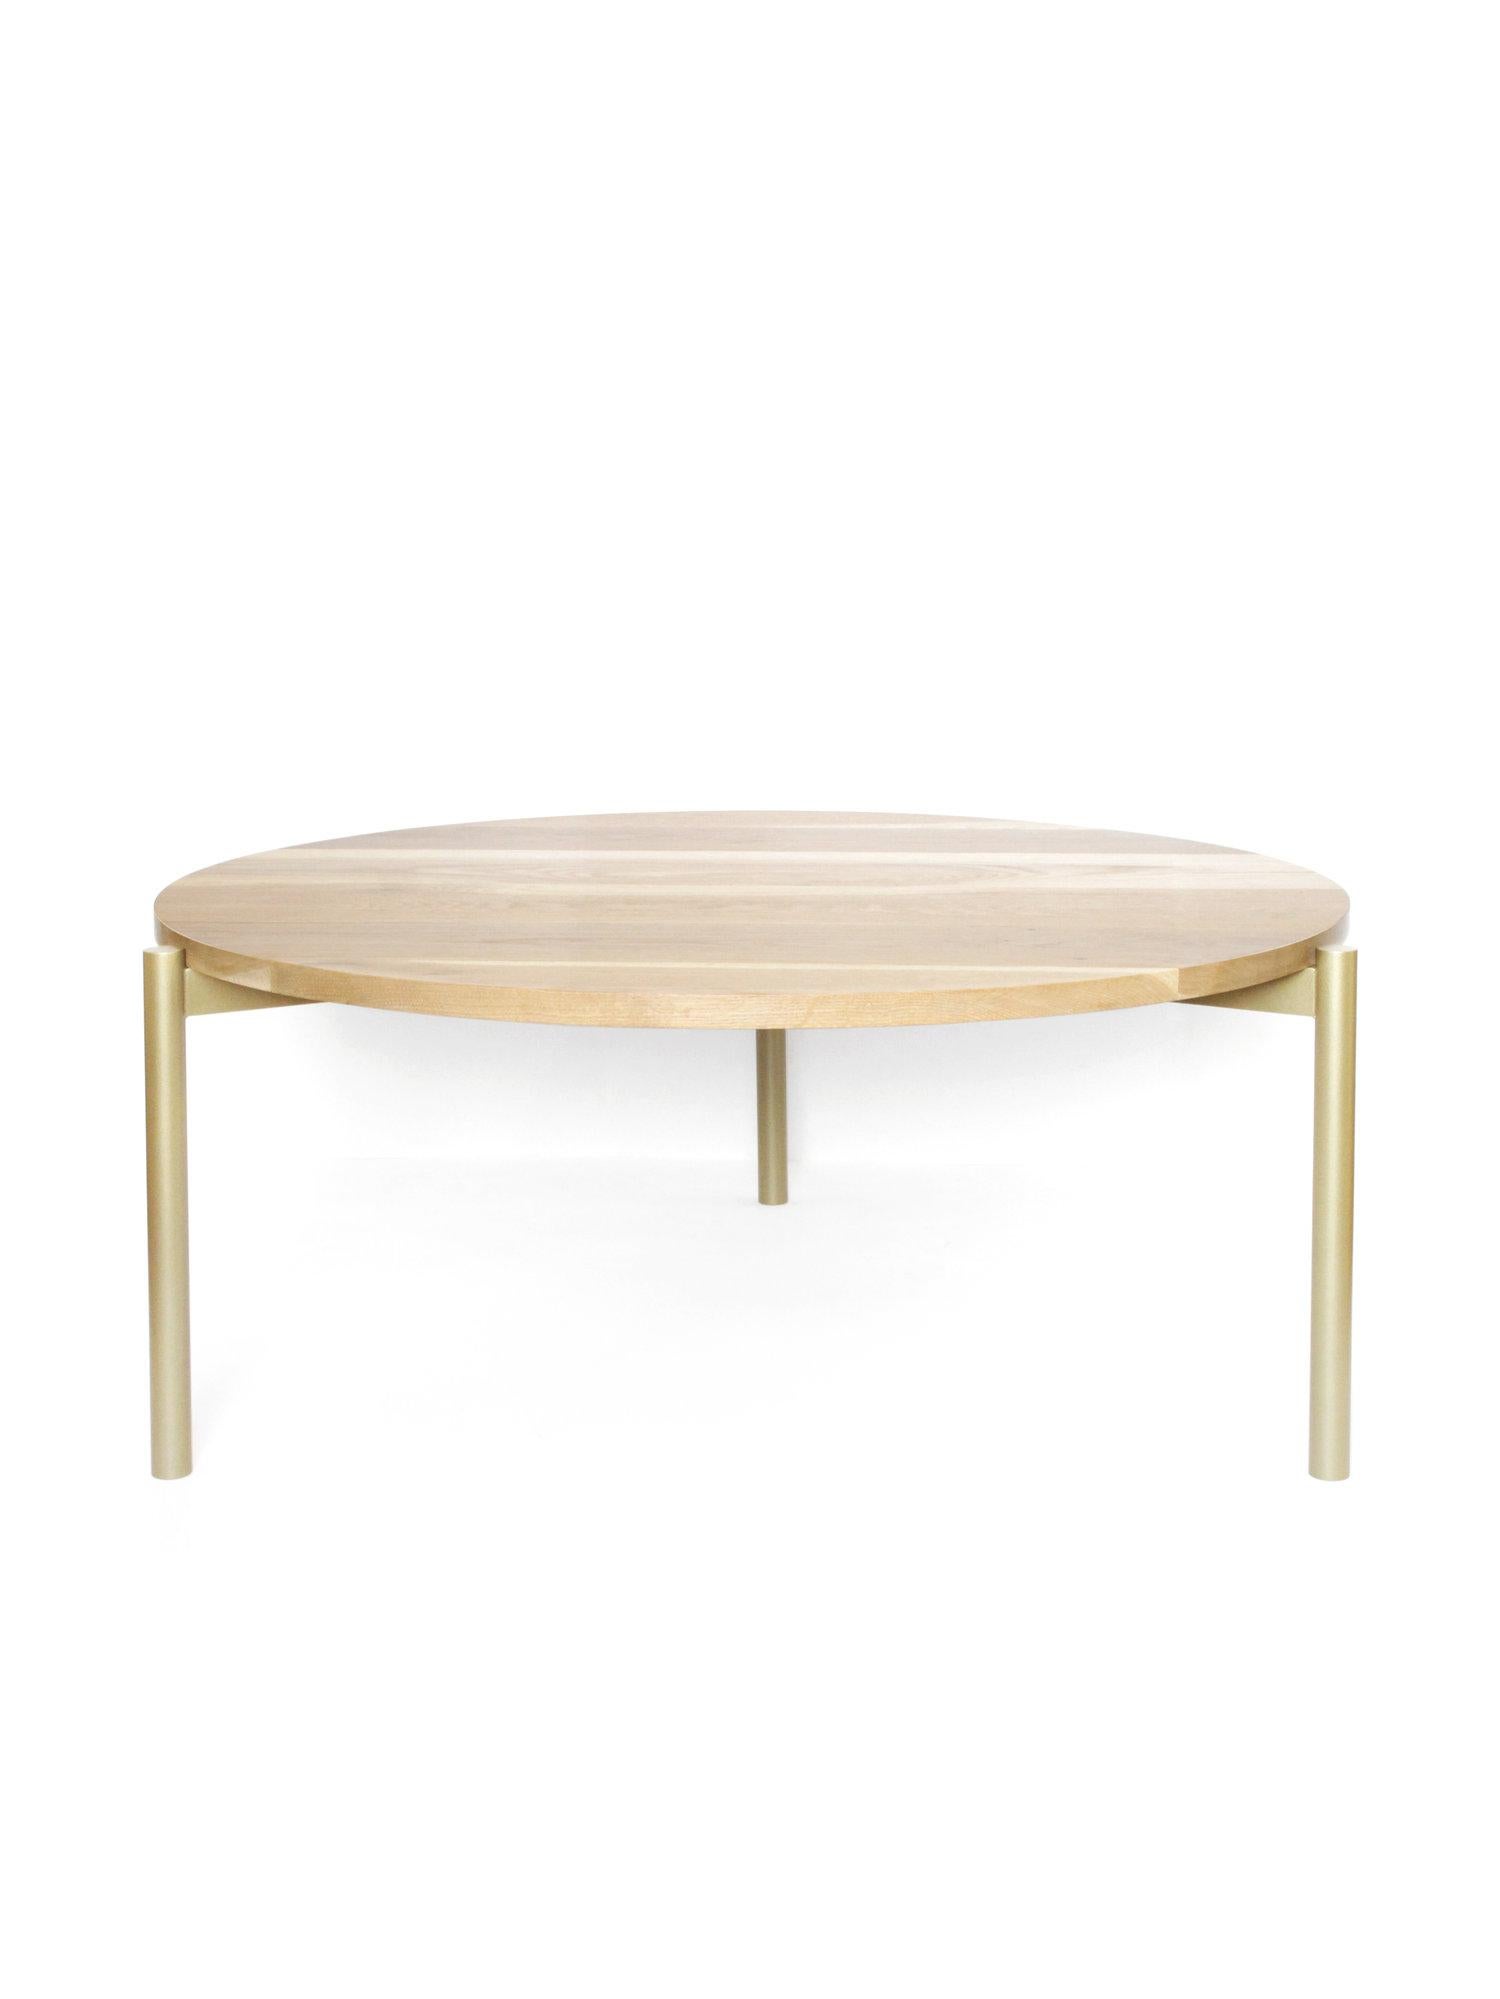 American Mix Contemporary Cocktail Table with Wood Top For Sale